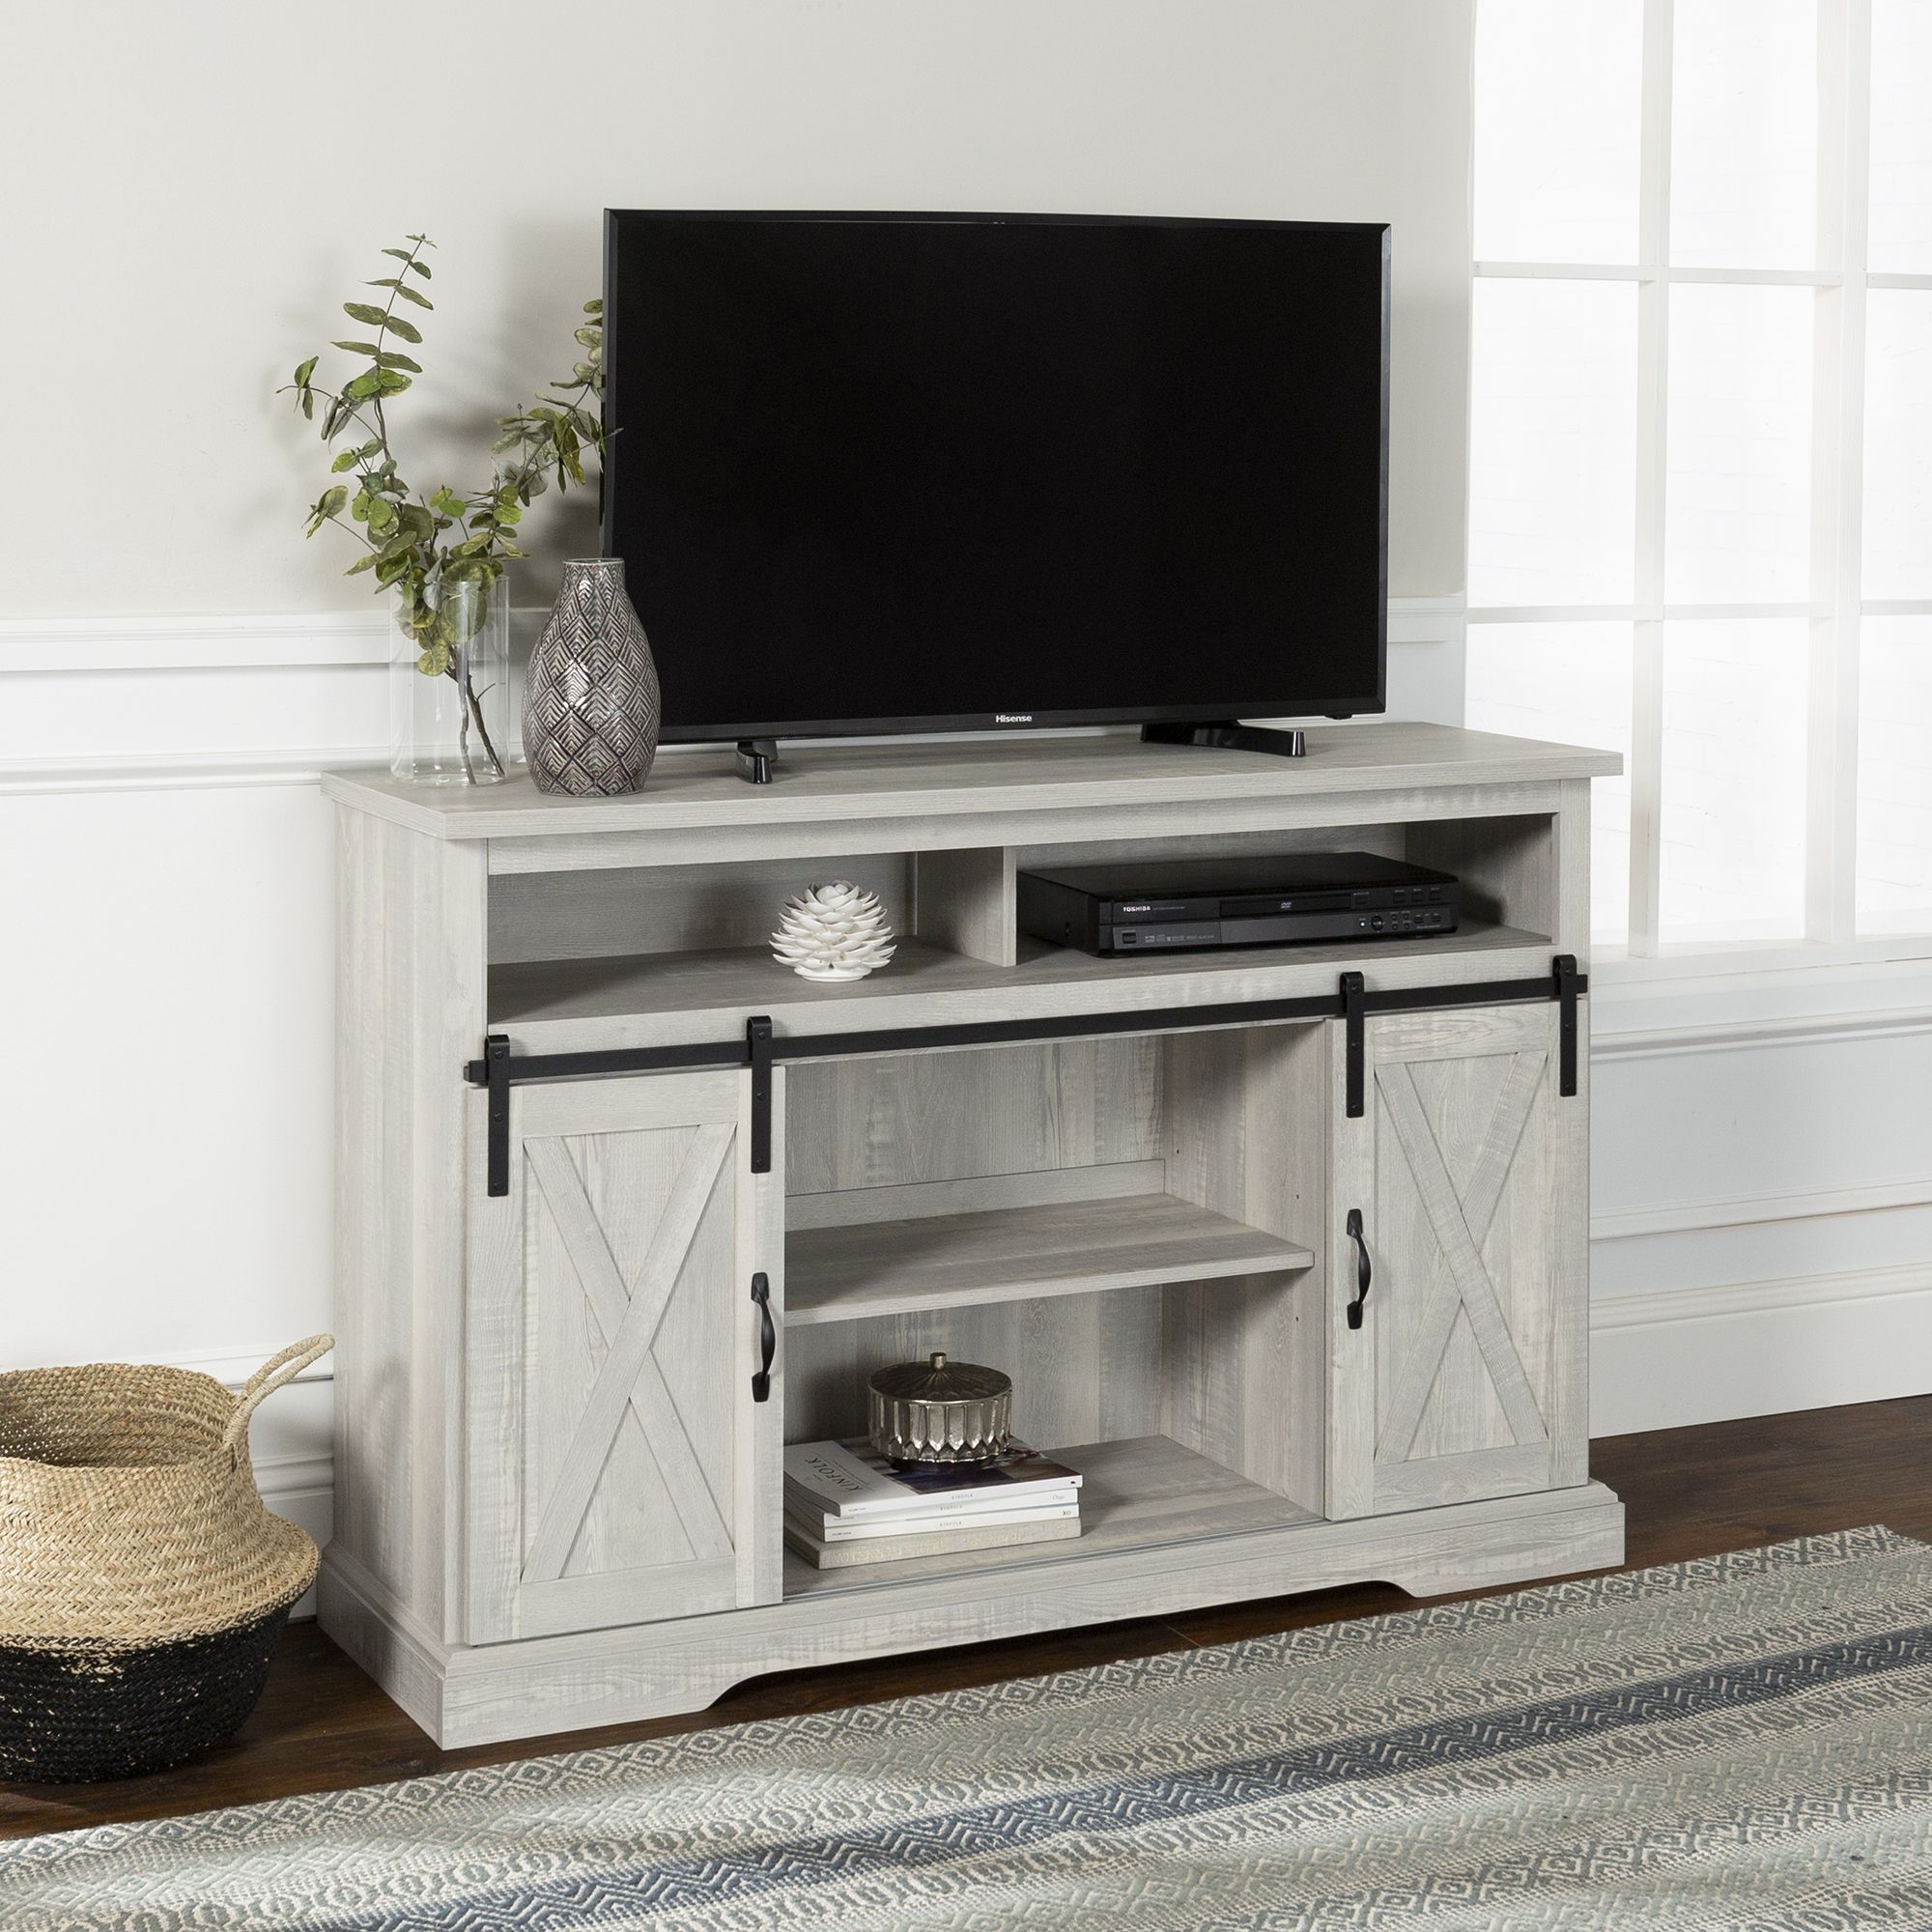 Manor Park Farmhouse Barn Door Tv Stand For Tvs Up To 58", Stone Gray With Regard To Farmhouse Media Entertainment Centers (View 19 of 20)